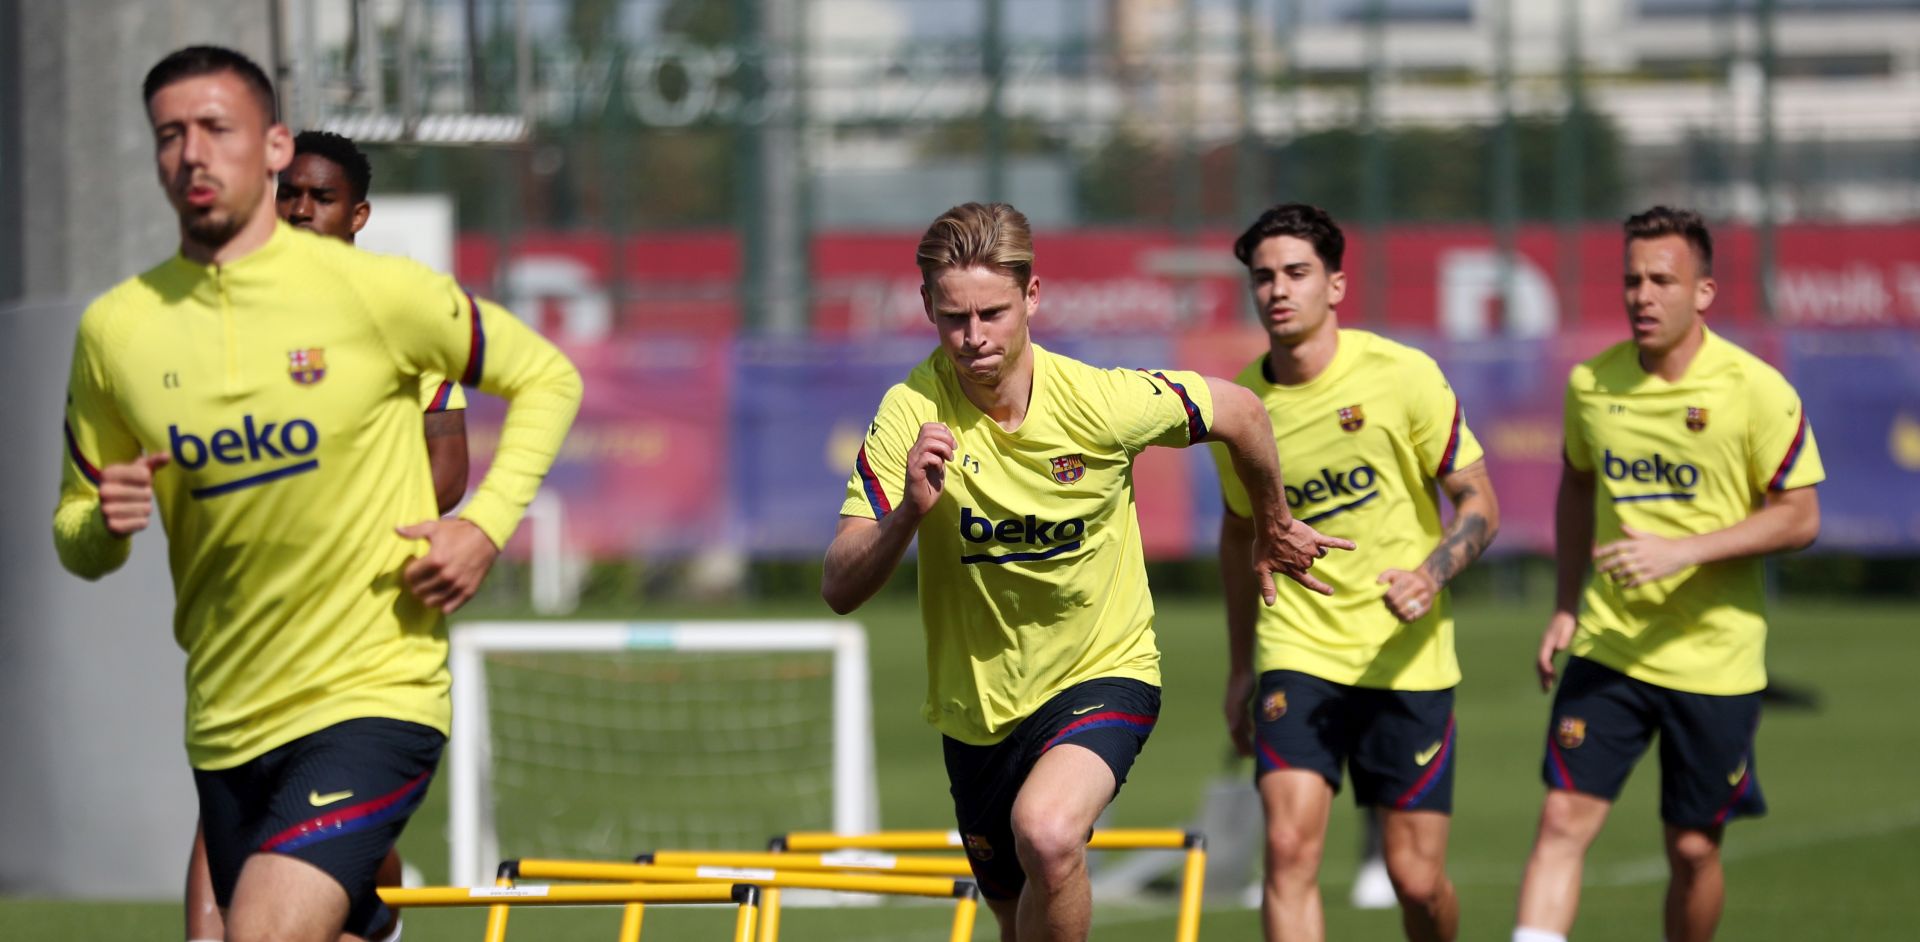 epa08443468 A handout picture provided by FC Barcelona shows FC Barcelona's midfielders Frankie de Jong (C) and Arthur Melo (R) and defender Clement Lenglet (L) during a training session at Joan Gamper Sports City in Barcelona, Catalonia, Spain, 25 May 2020. FC Barcelona began the training sessions on groups of 14 players due to coronavirus health protocol.  EPA/Miguel Ruiz / HANDOUT  HANDOUT EDITORIAL USE ONLY/NO SALES